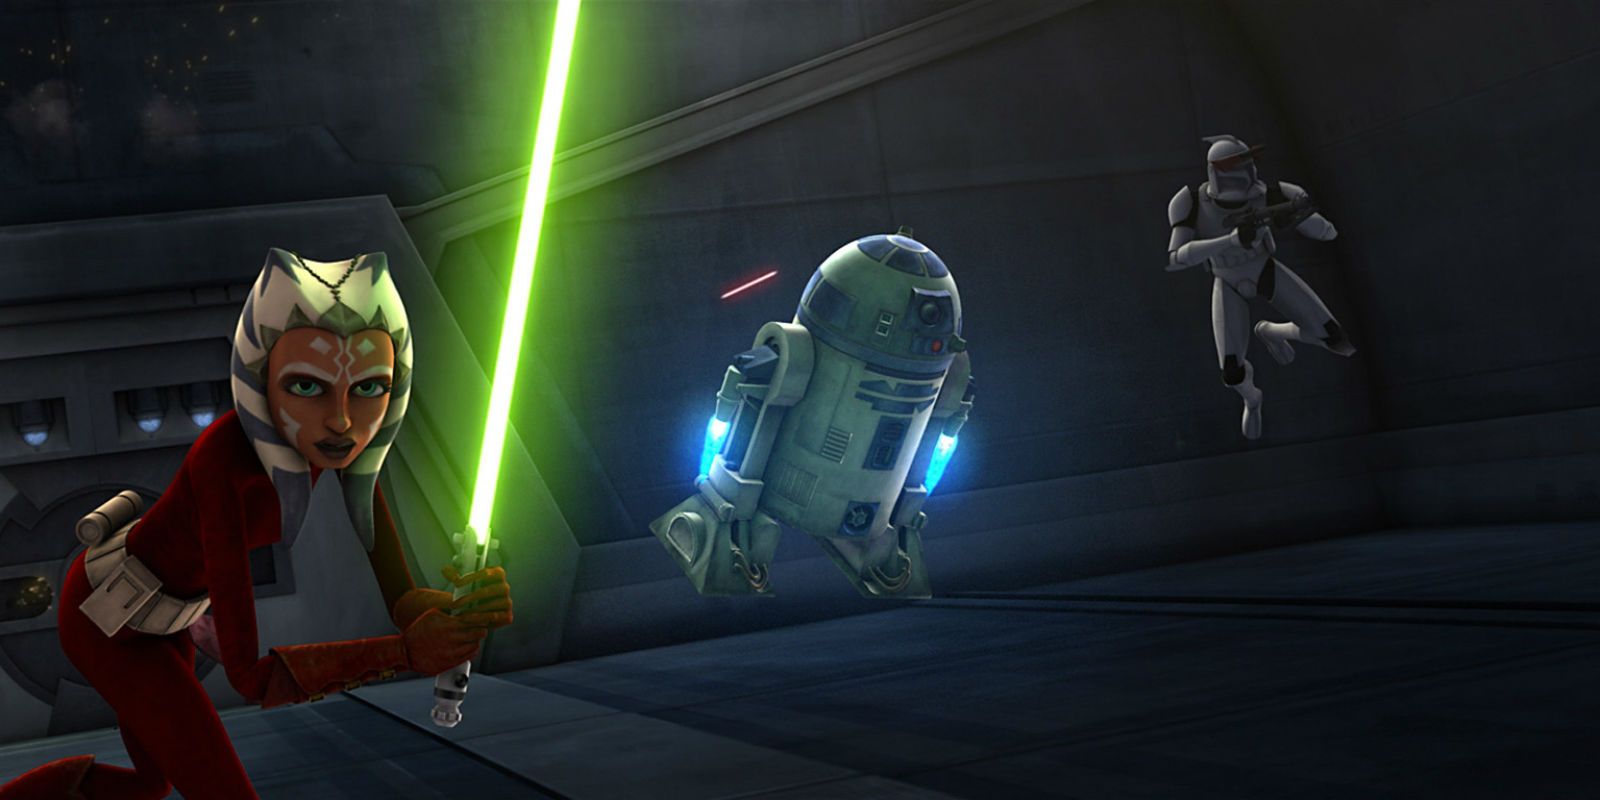 Ahsoka Tano and R2-D2 Prepare for Battle in the Clones Wars Television Show